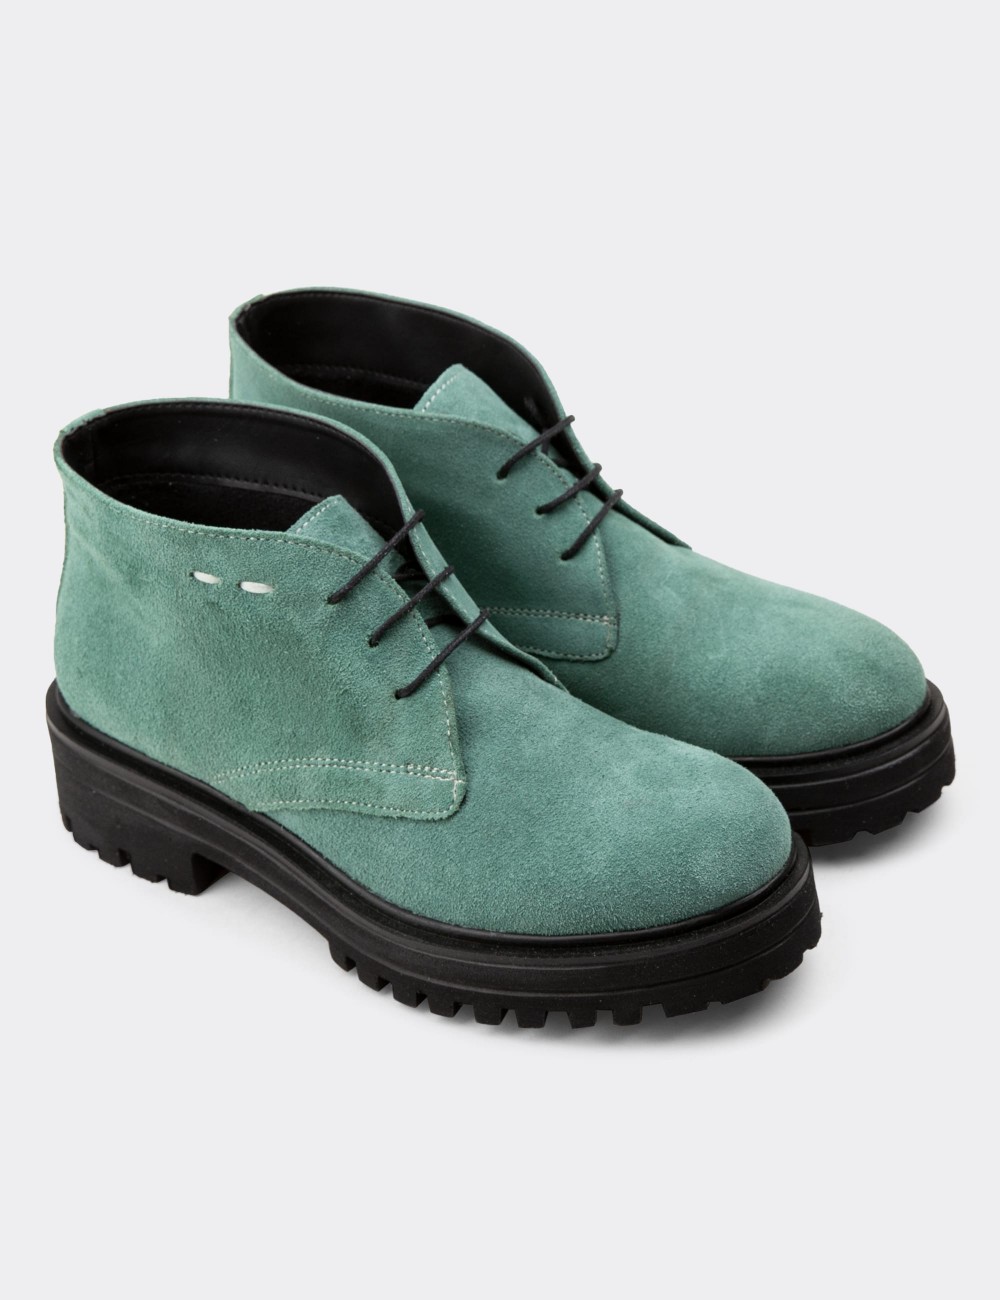 Green Suede Leather Boots - 01847ZYSLE01